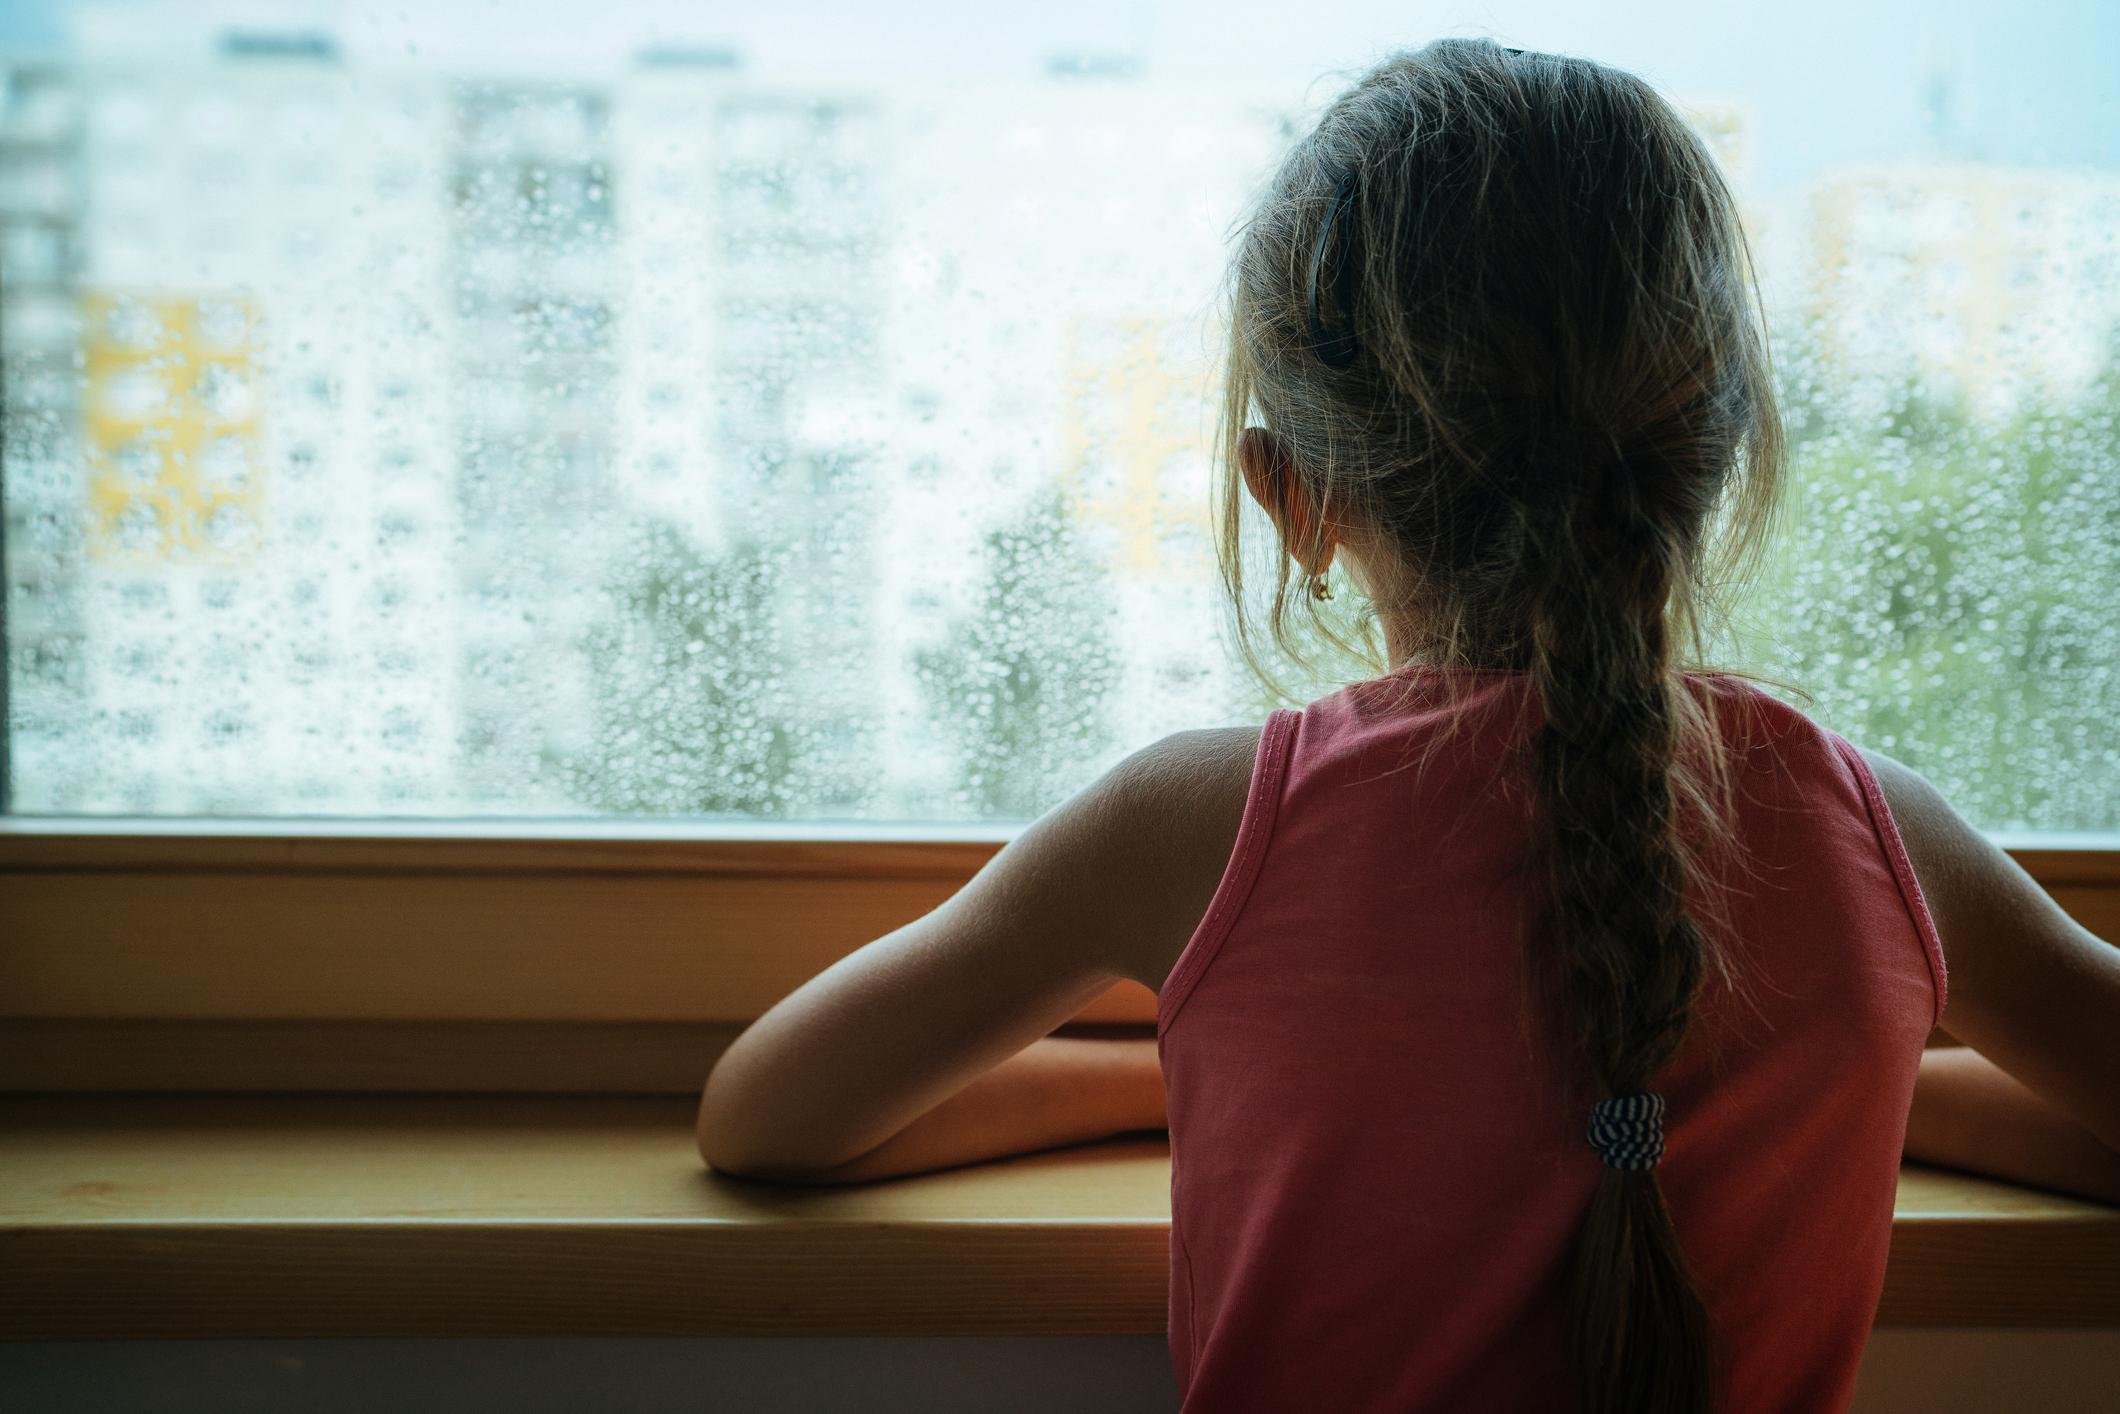 More than 2,600 EU children in care are yet to be granted settled status through the EU settlement scheme, according to data obtained by the Children’s Society